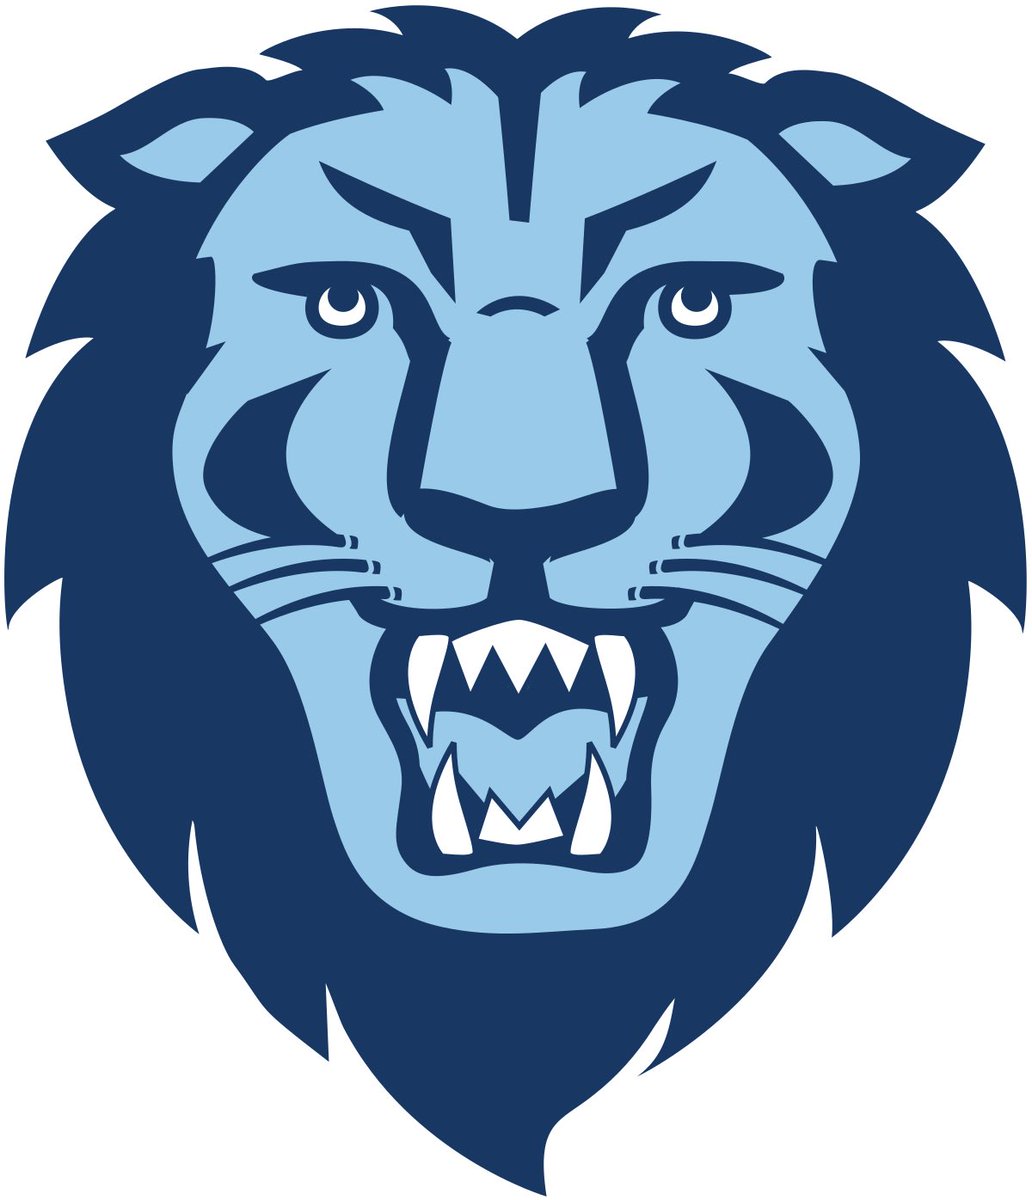 After a great call with @CoachJonMc I’m honored to have earned my 2nd Division 1 offer and 1st Ivy League offer to Columbia University! @Coach_Fab @WallKnightsFB @mjfrecruits